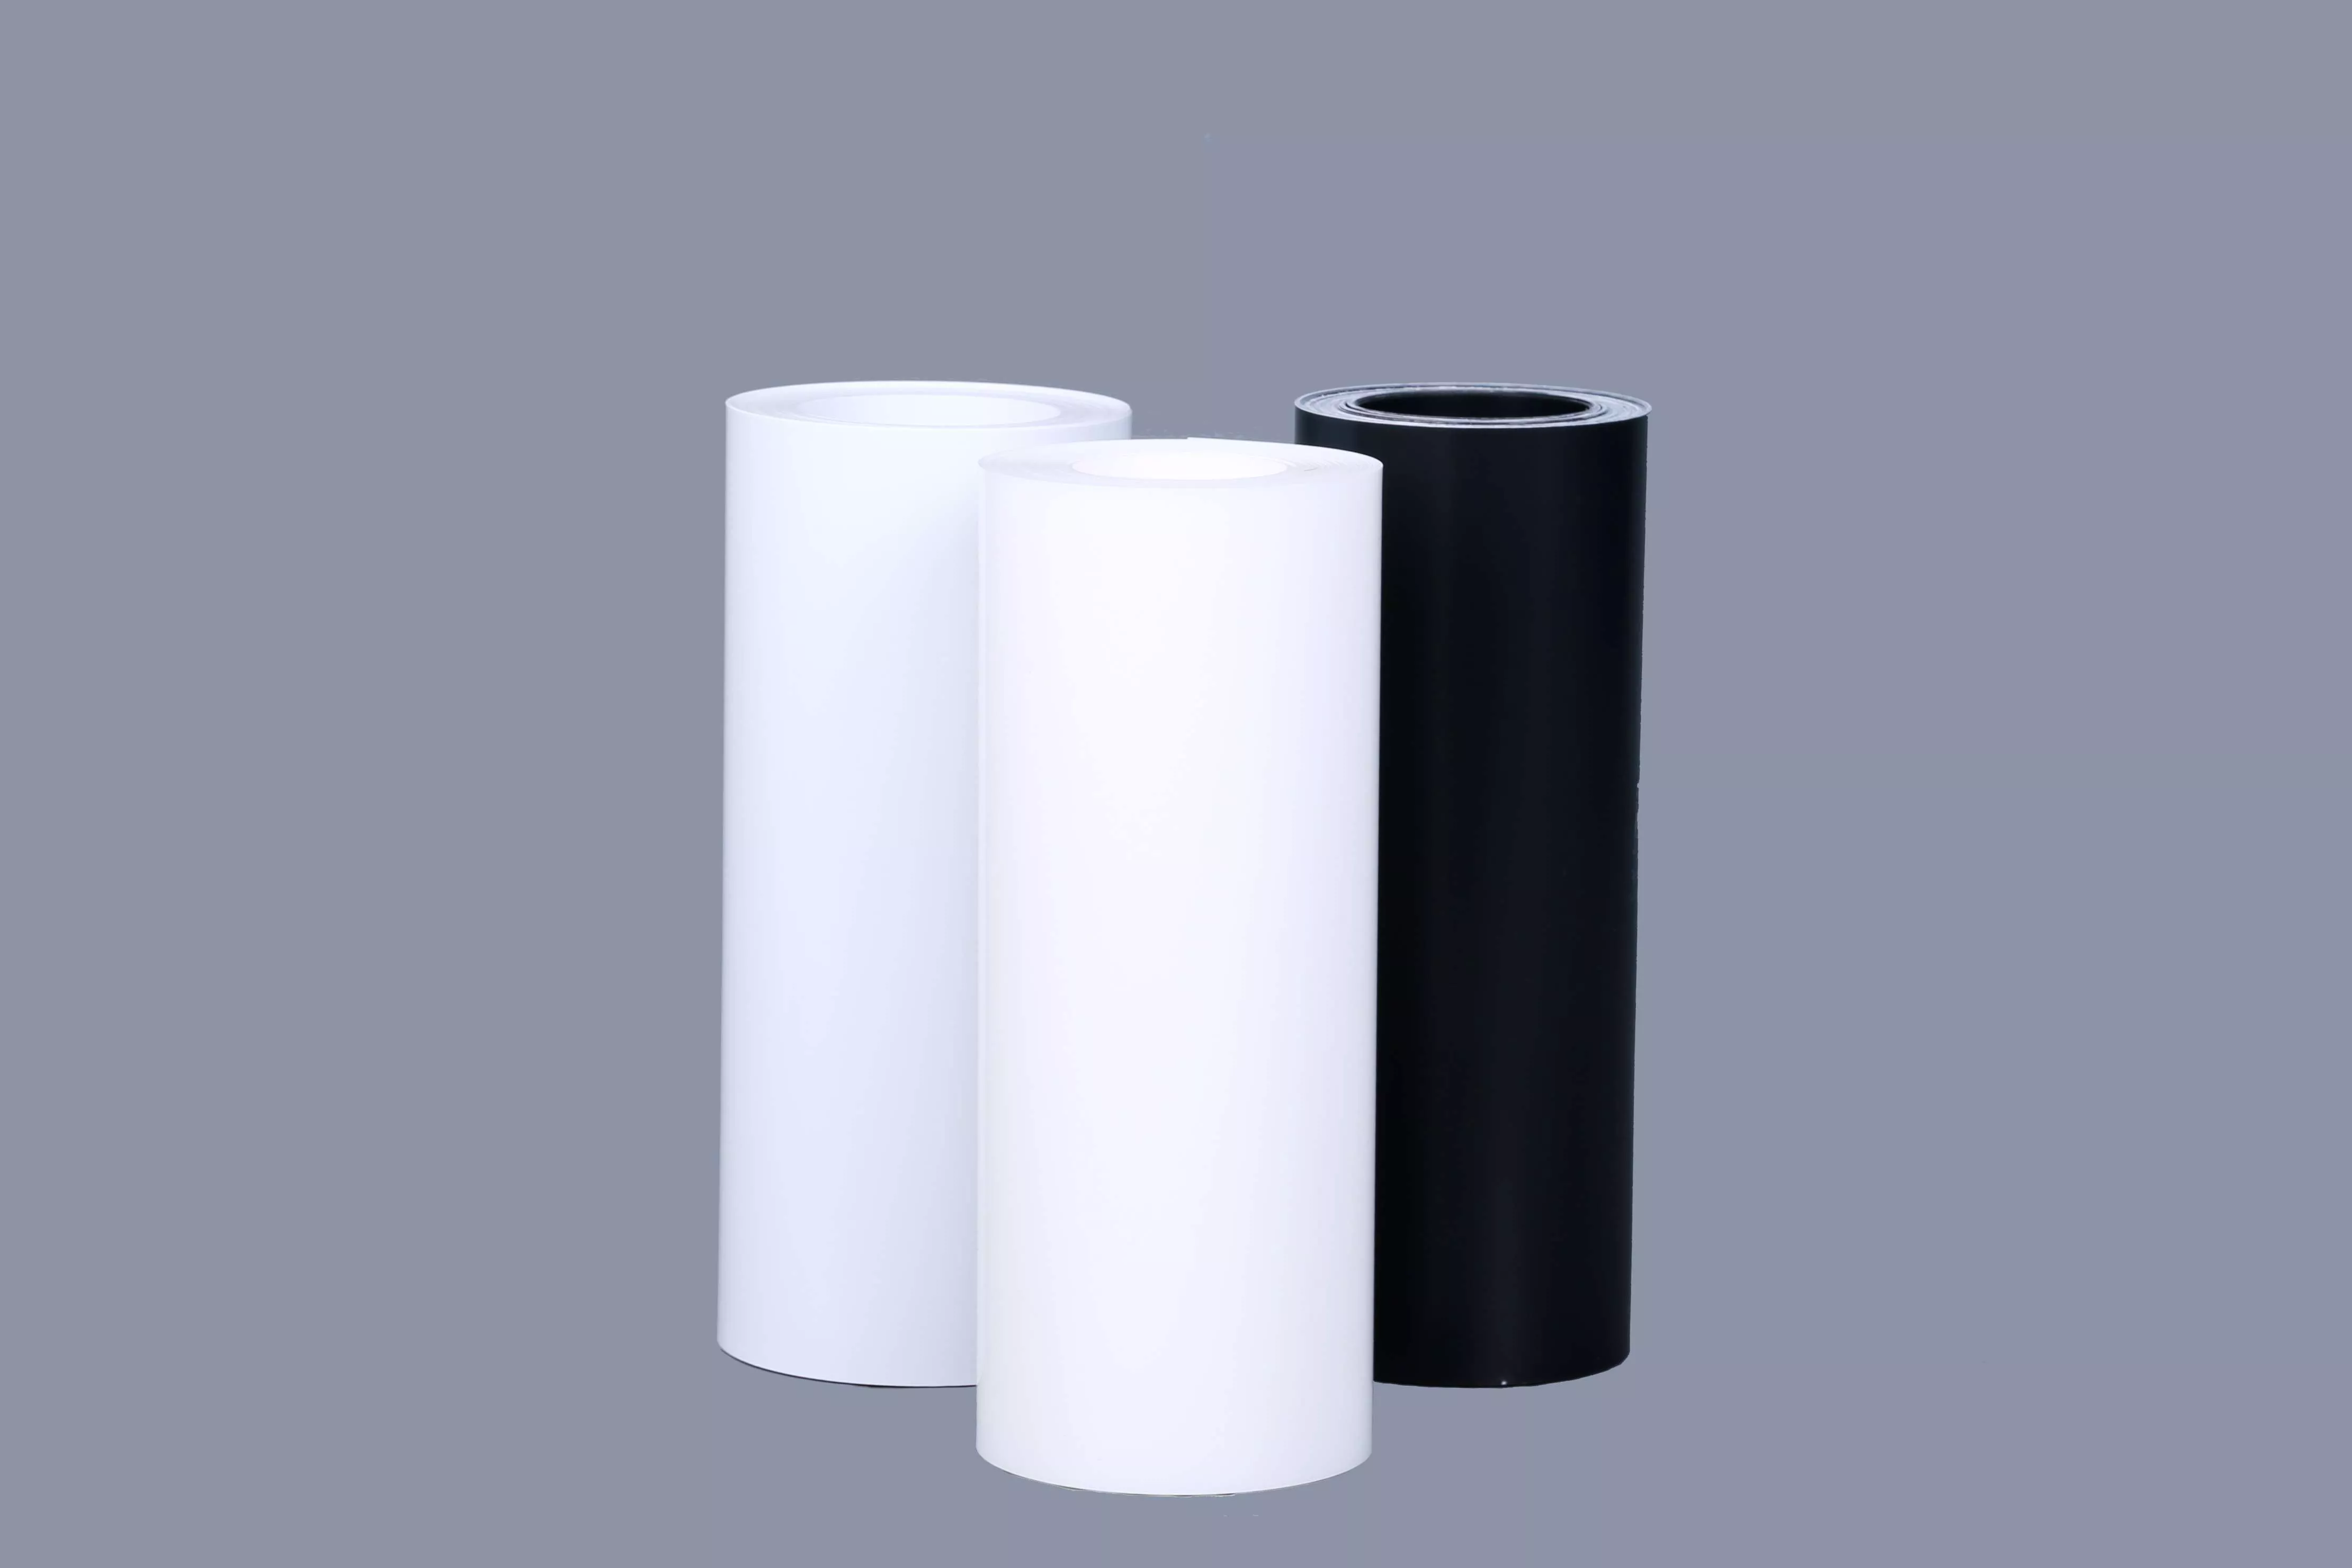  PP sheet (roll stock) for thermoforming Tray common conductive-1